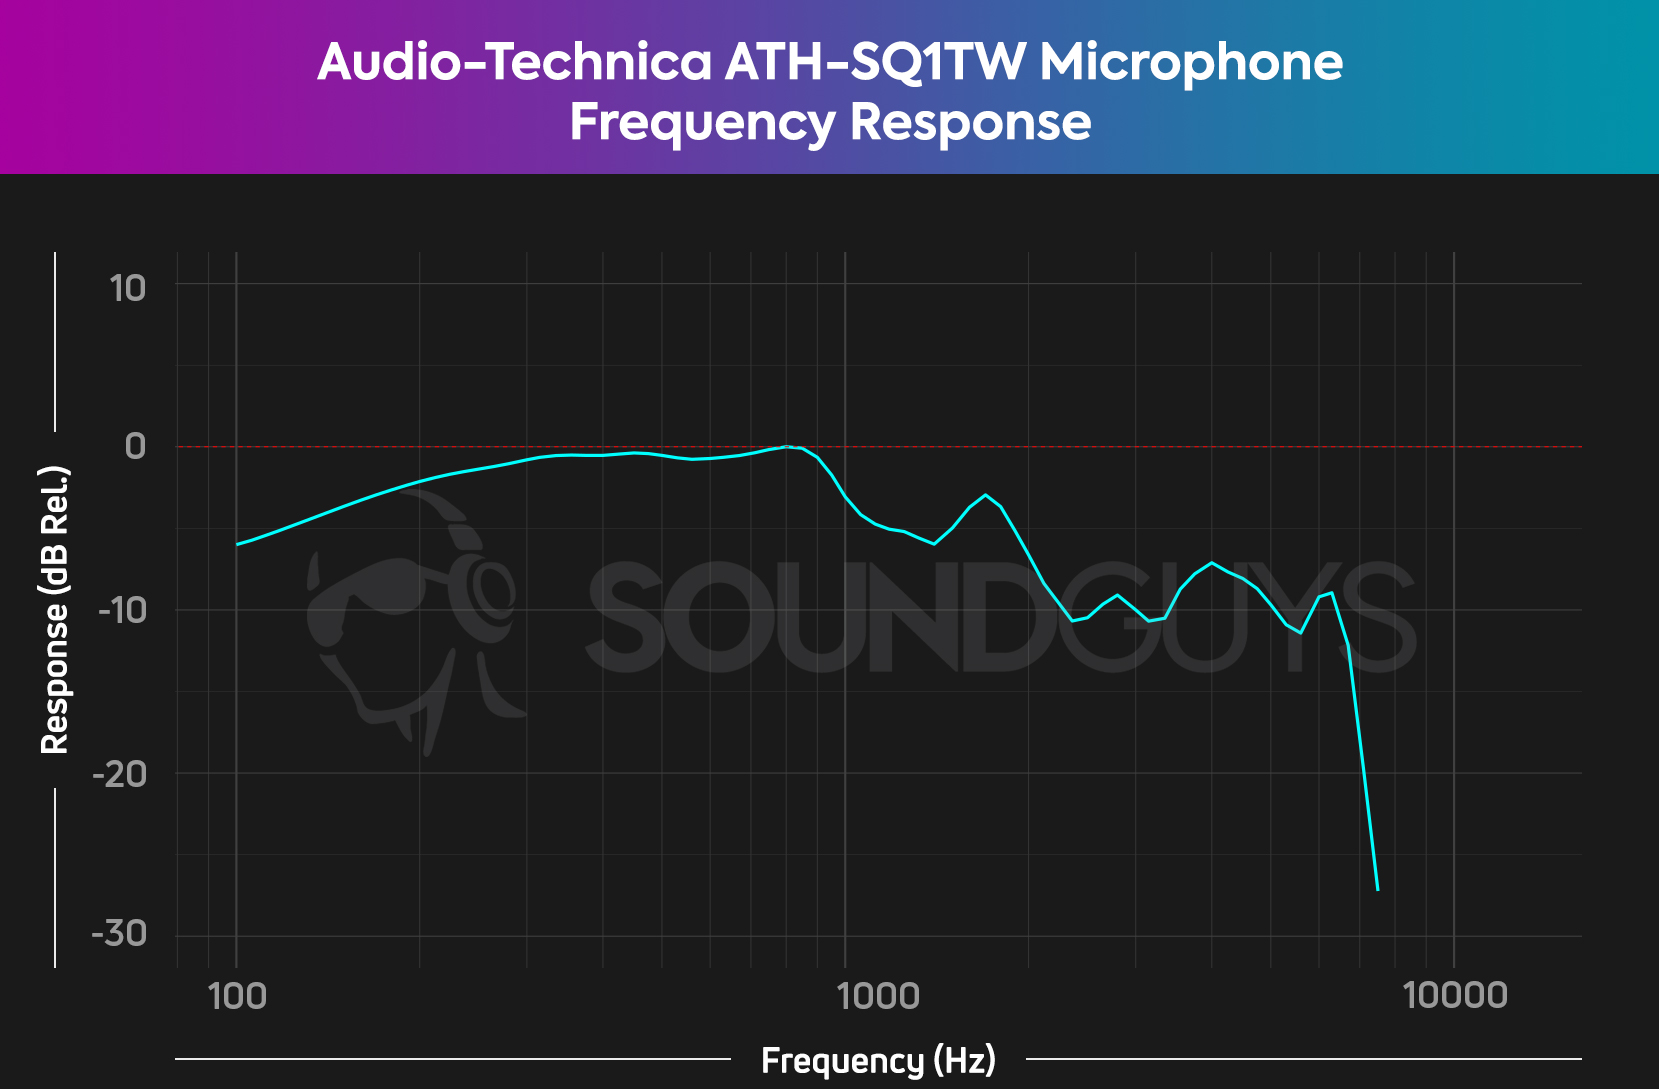 A chart depicts the microphone frequency response of the Audio-Technica ATH-SQ1TW, showing that there's some attenuation to frequencies above 1kHz.